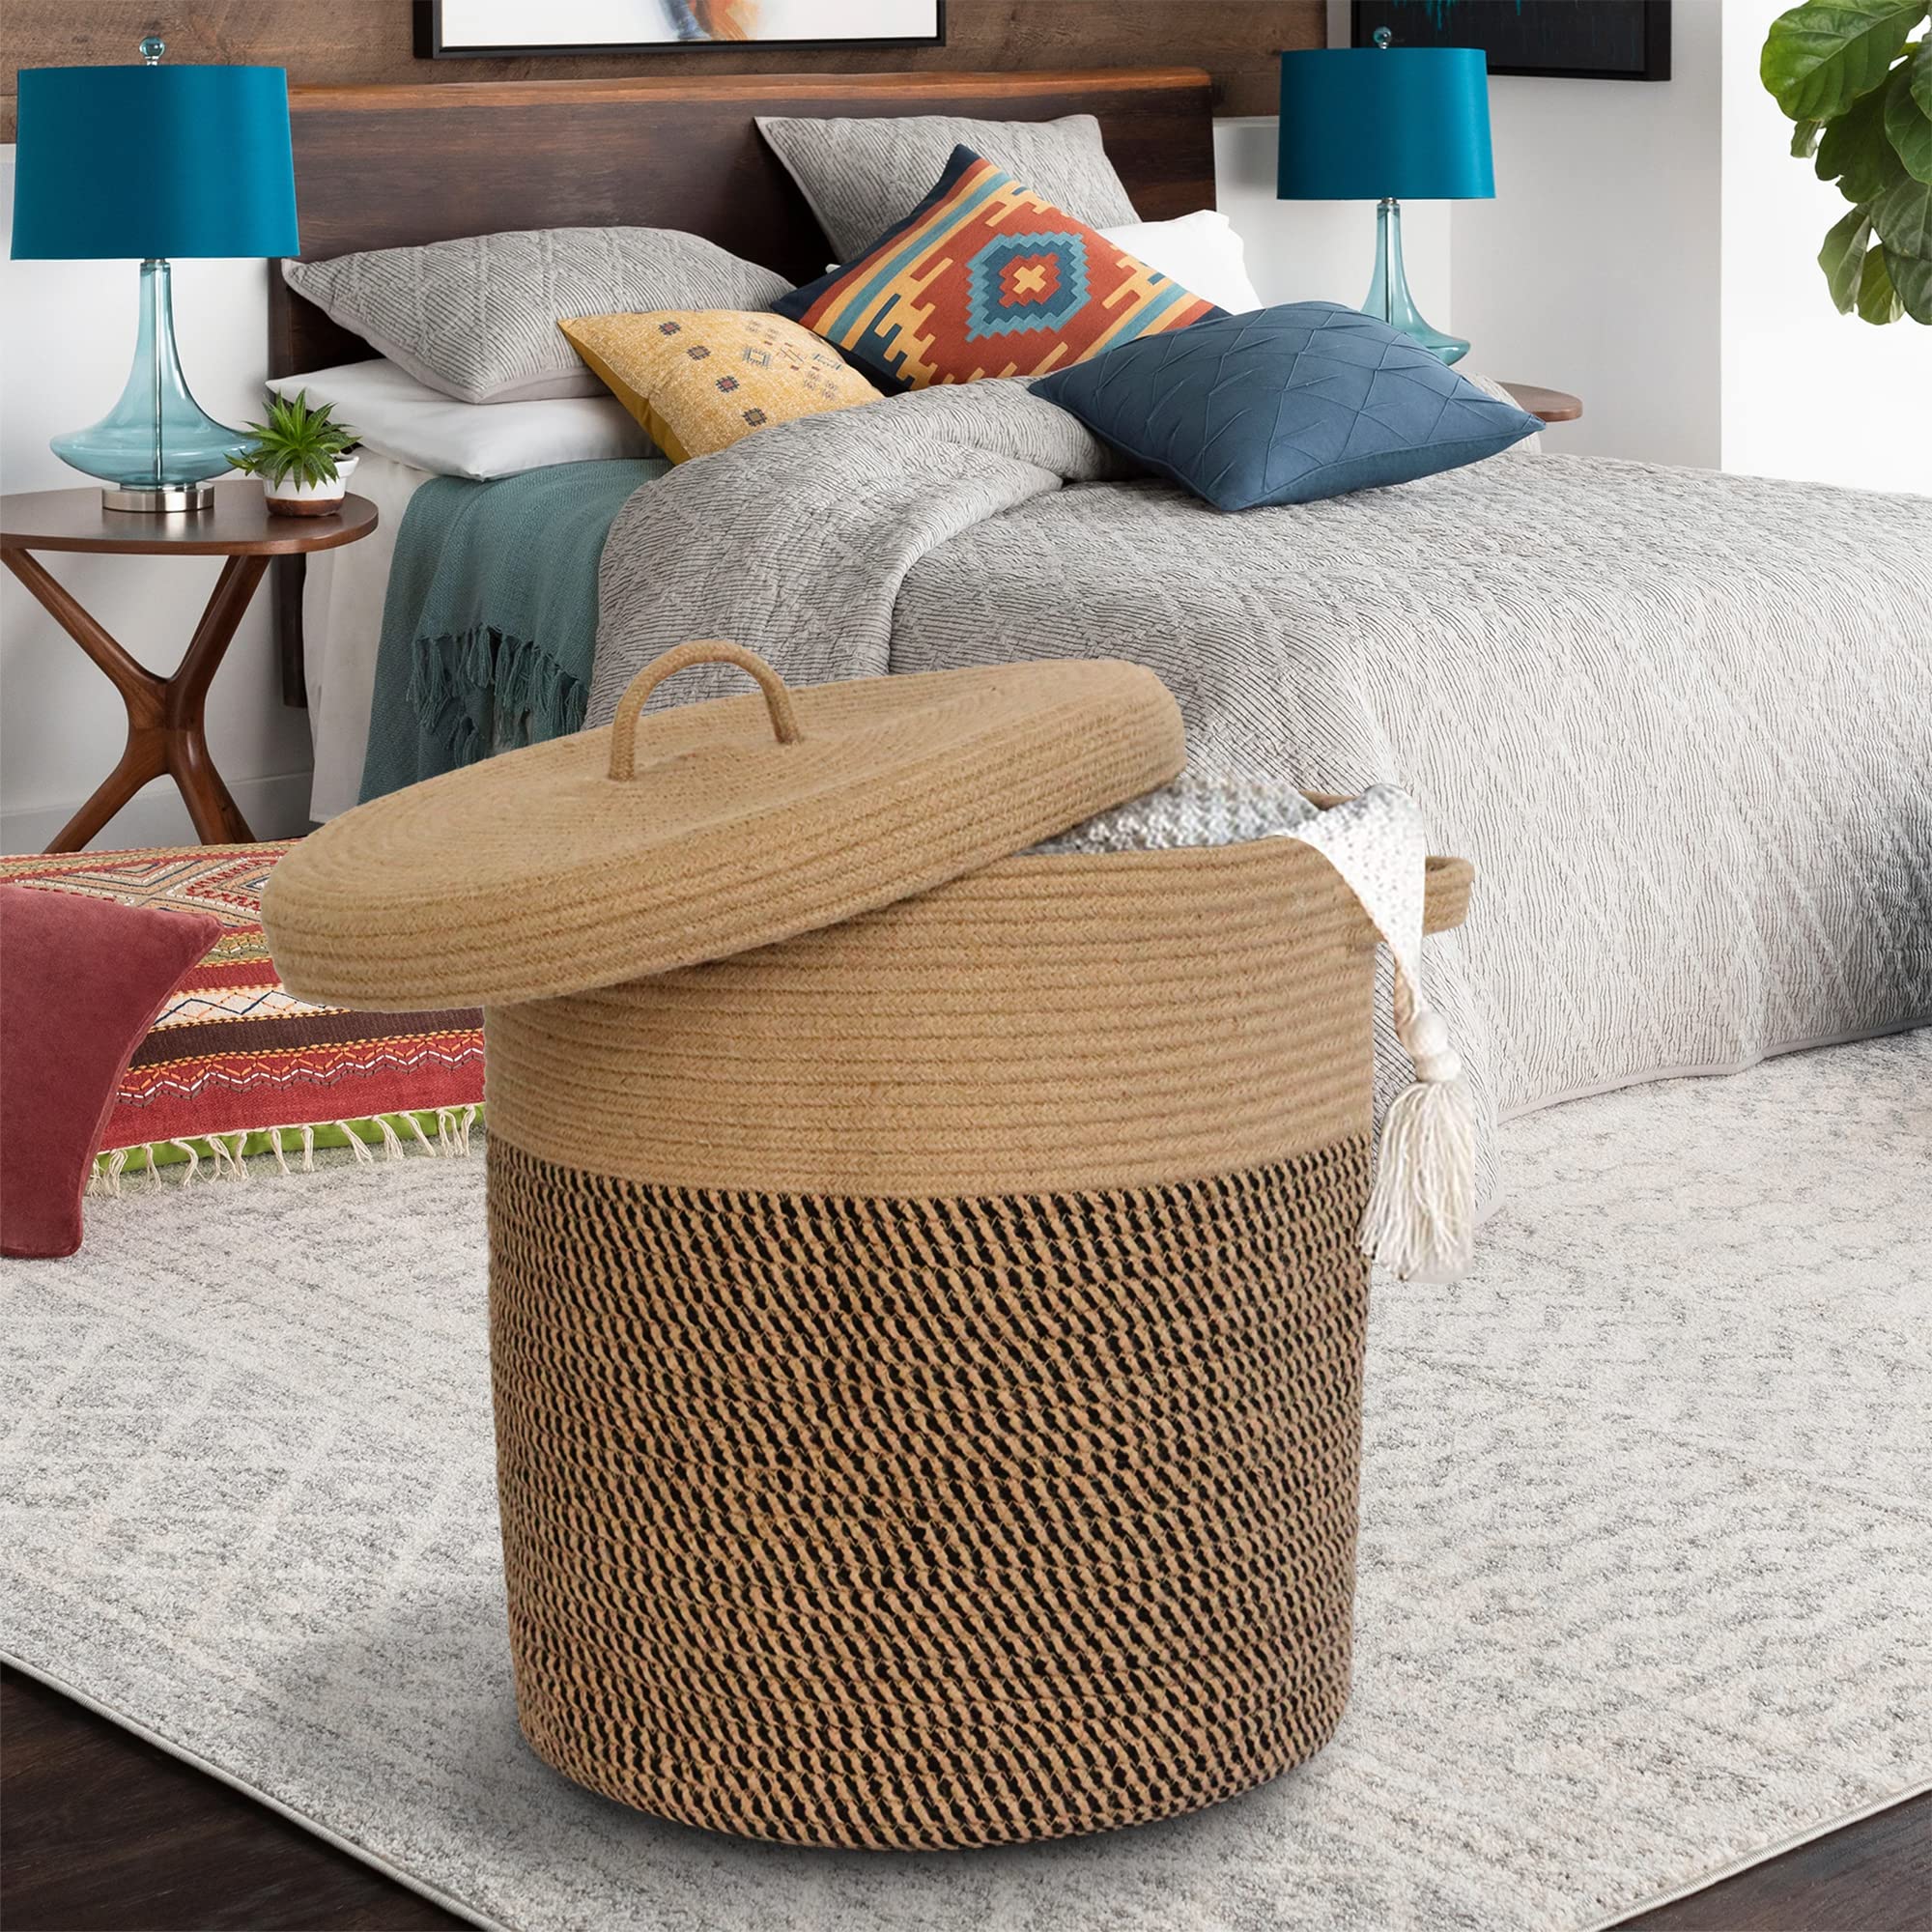 Extra Large Storage Basket with Lid 60L, 16"Wx18"H Woven laundry basket with lid Jute Laundry Basket, Wicker Basket Blankets Pillows Storage in Living Room Baby Nursery, Jute/Black Mix with Lid